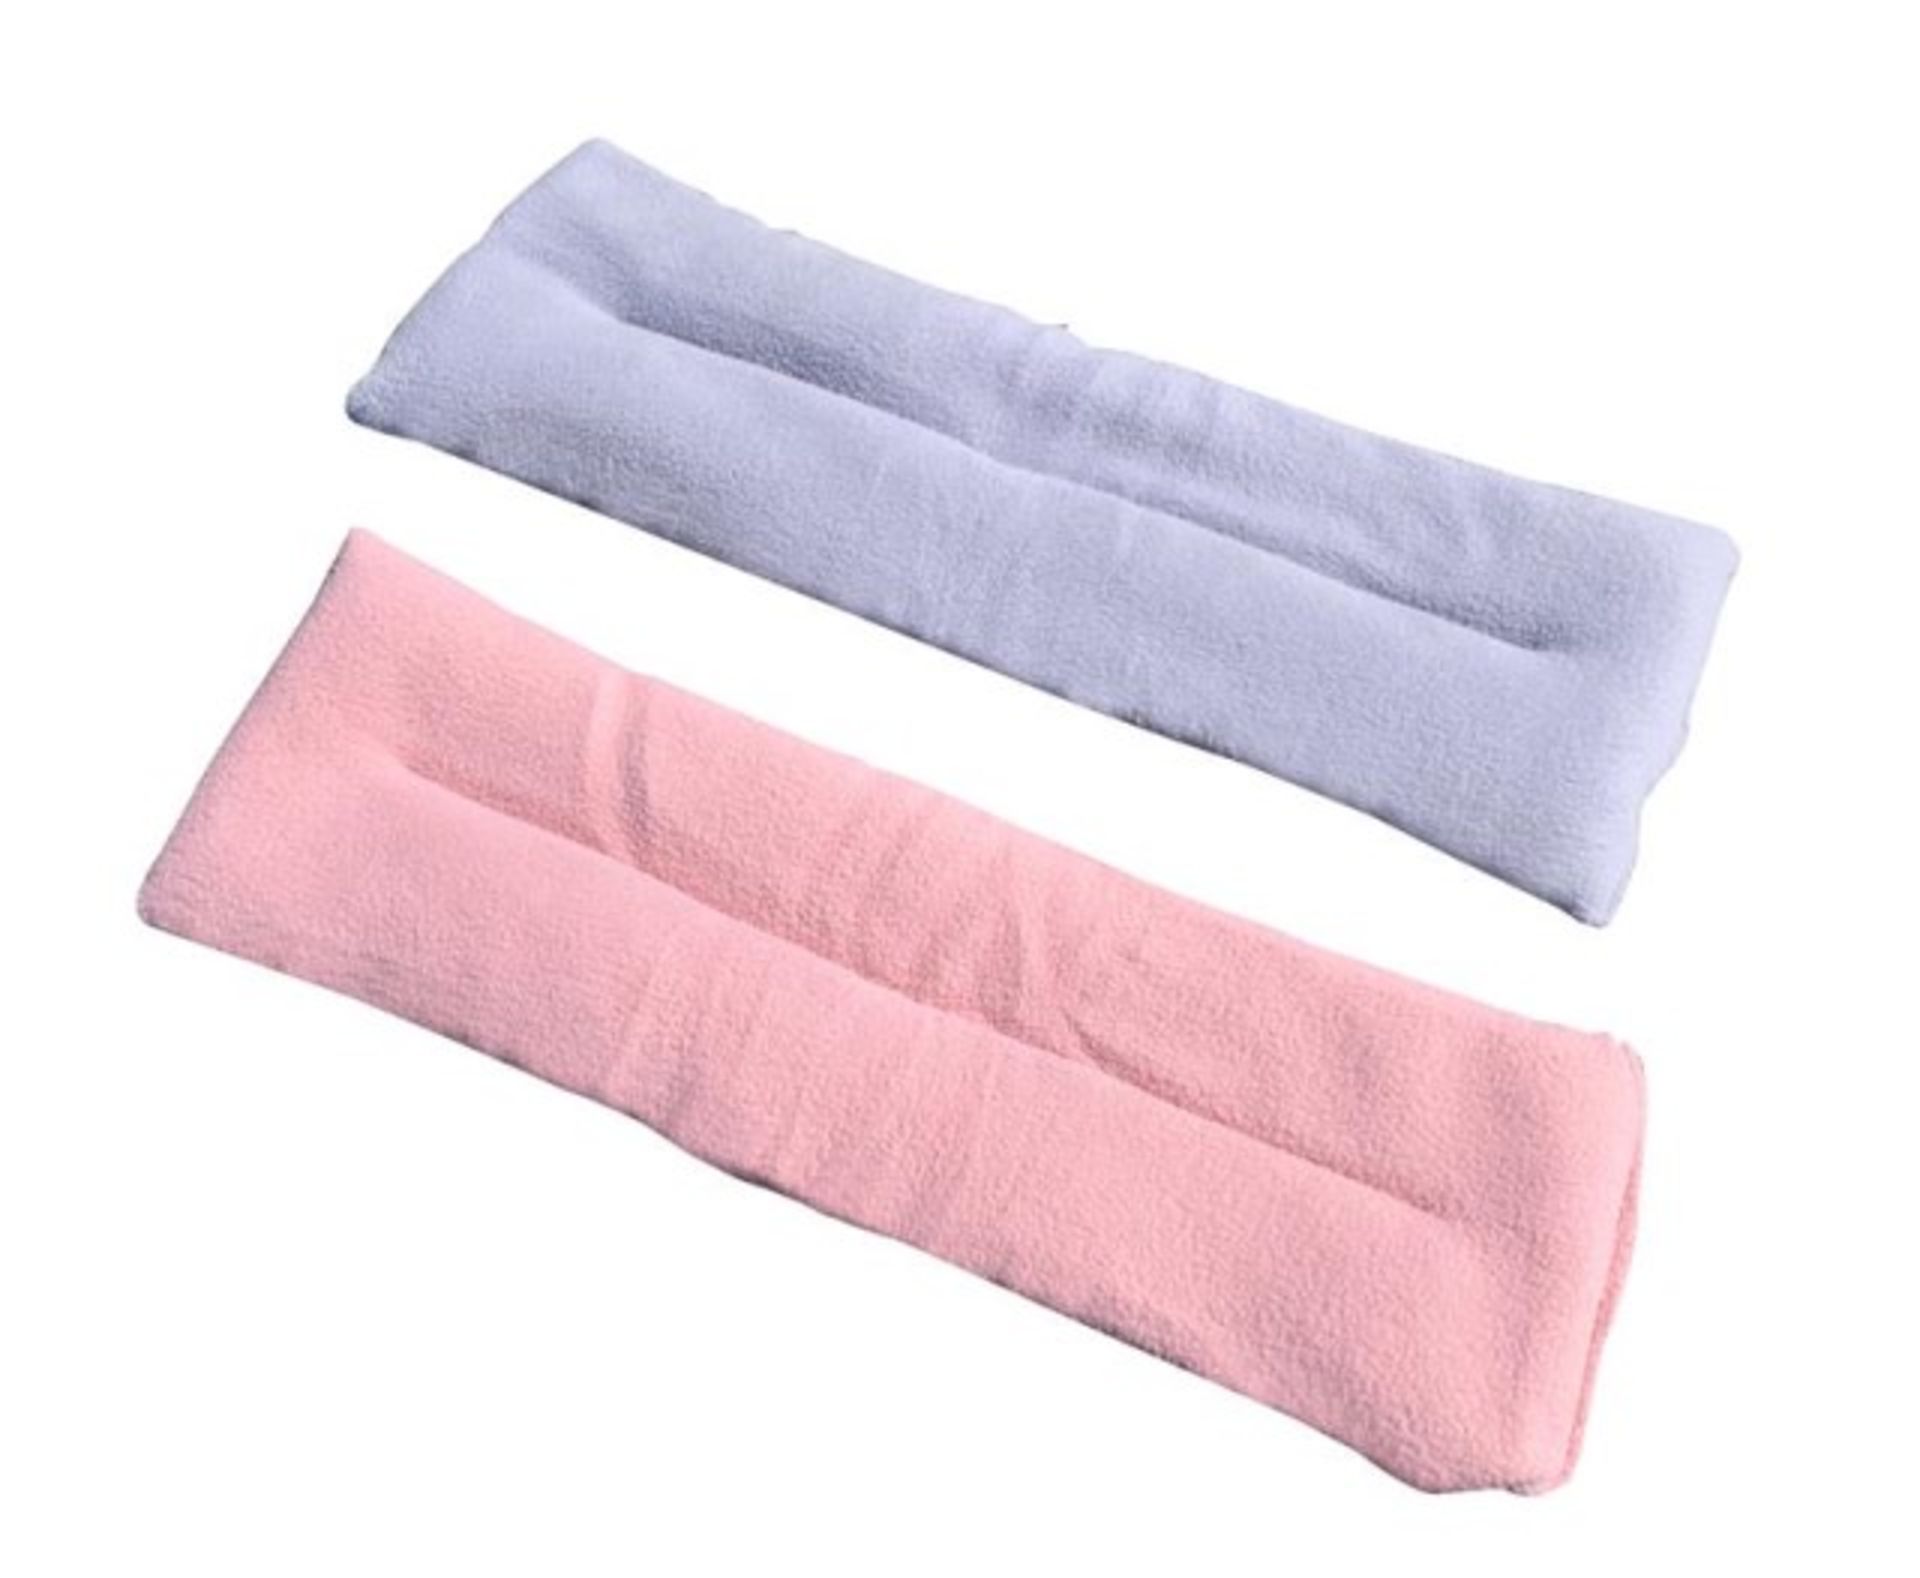 V Grade A Two Wheat And Lavender Heat Pillows - Helps Soothe Aches & Pains (Colours May Vary)